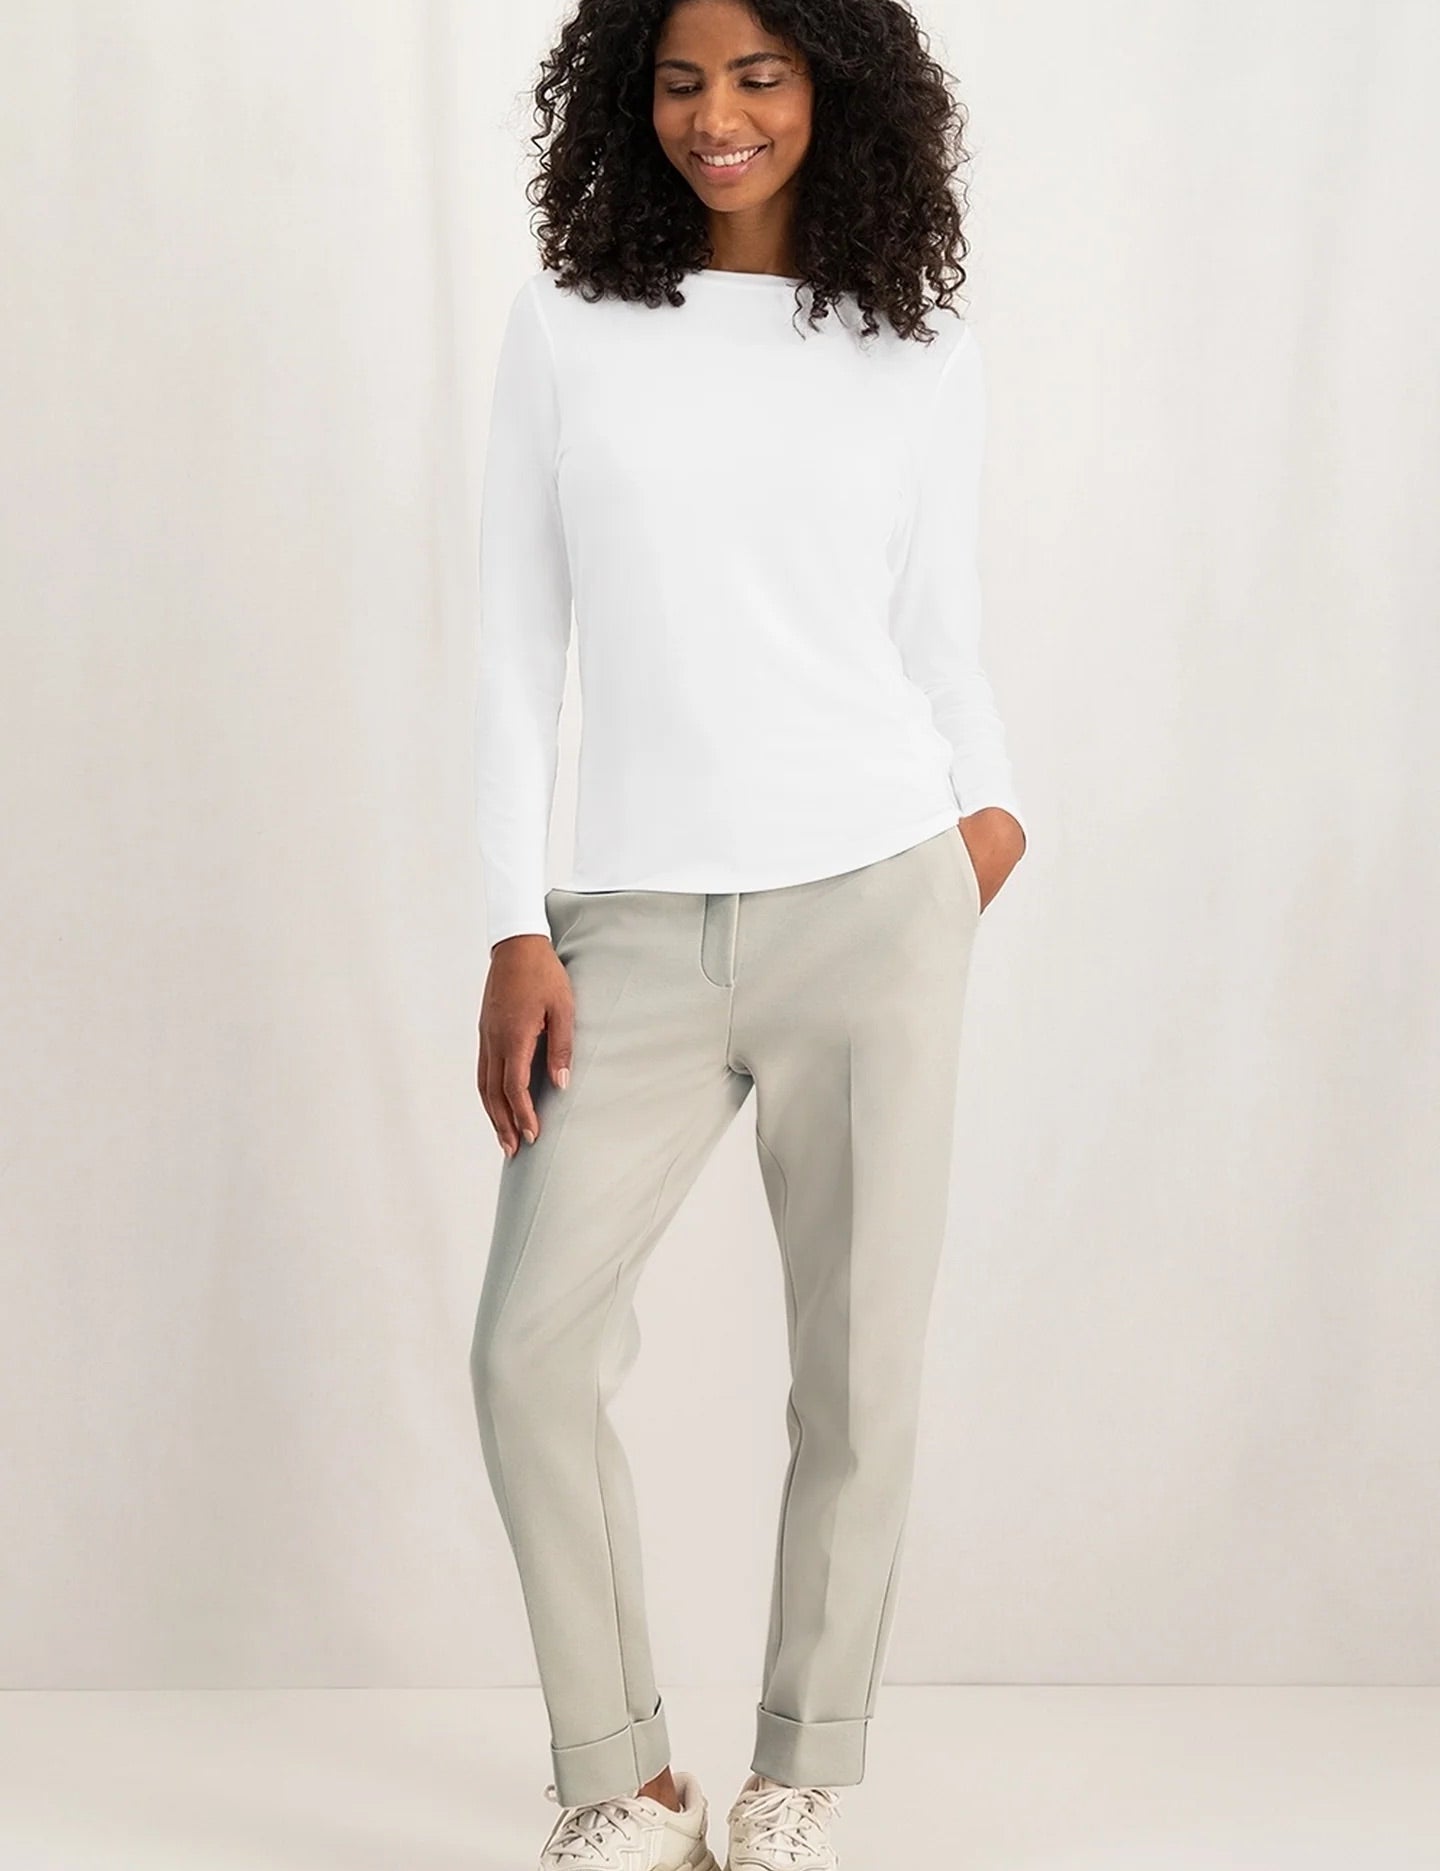 t-shirt-with-boatneck-and-long-sleeves-in-regular-fit-pure-white_2880x_jpg.jpg